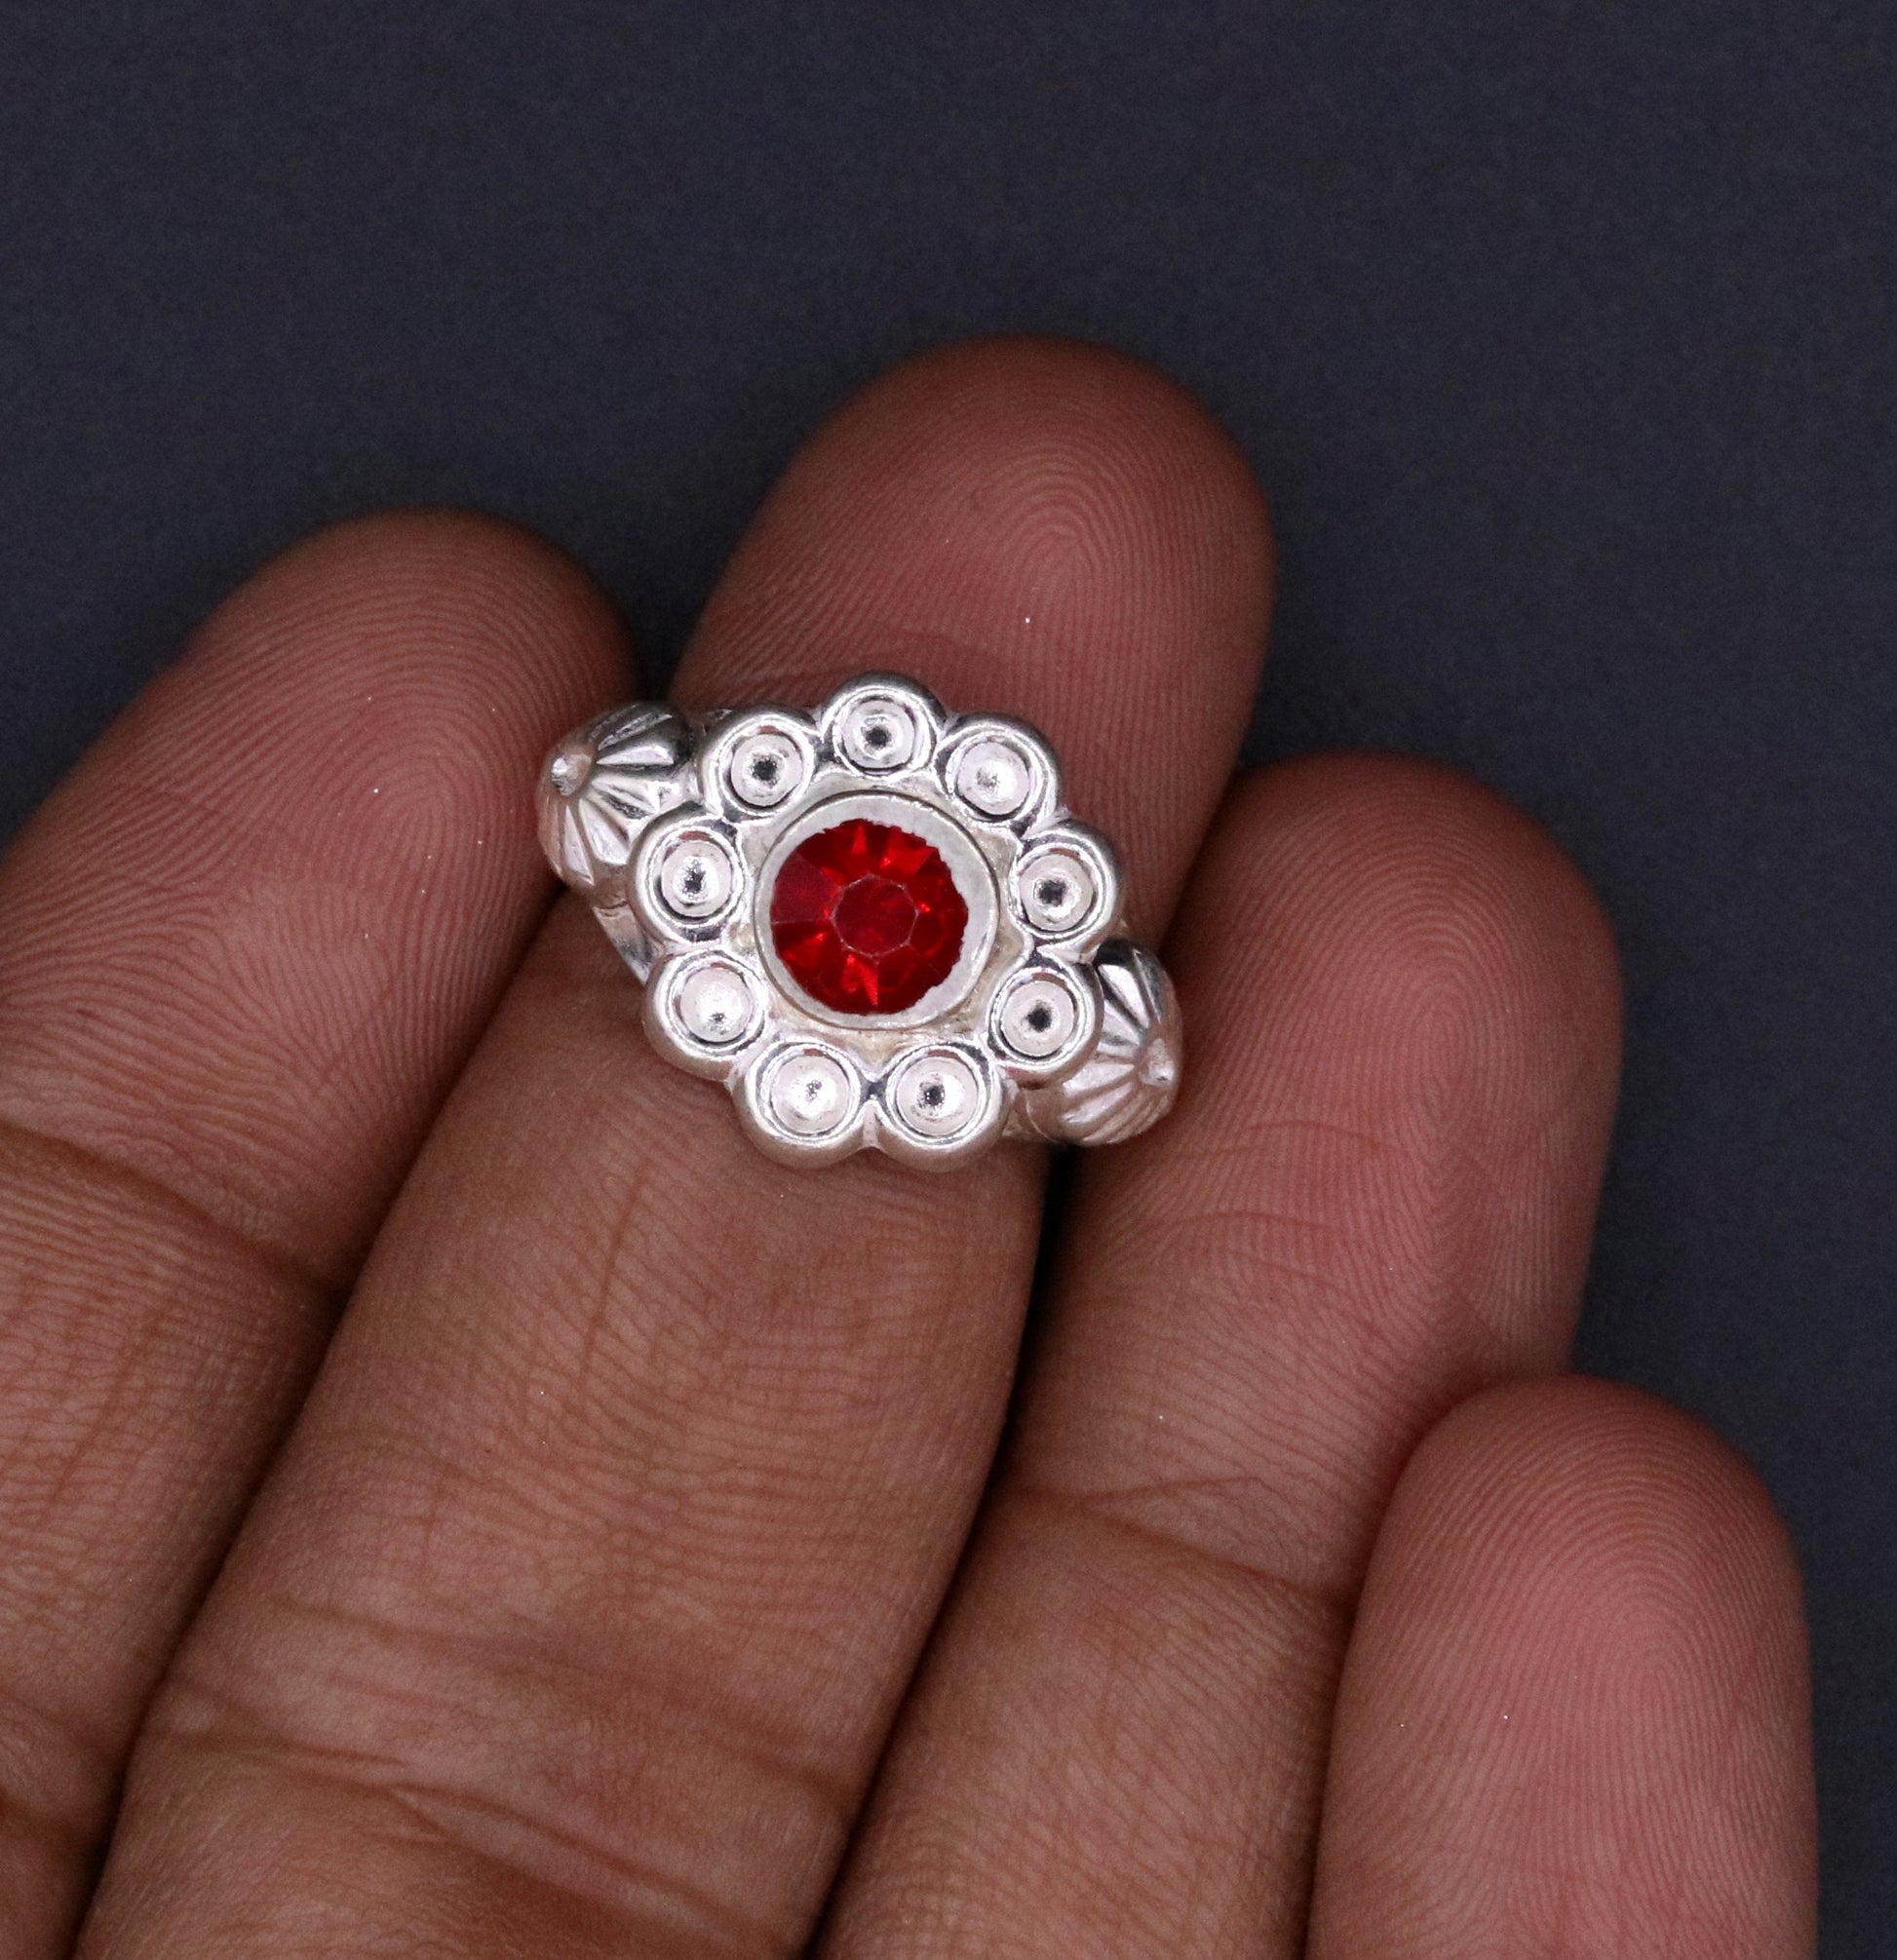 Traditional style handmade gorgeous red stone jadau ring band women's jewelry from rajasthan india !!sr51 - TRIBAL ORNAMENTS